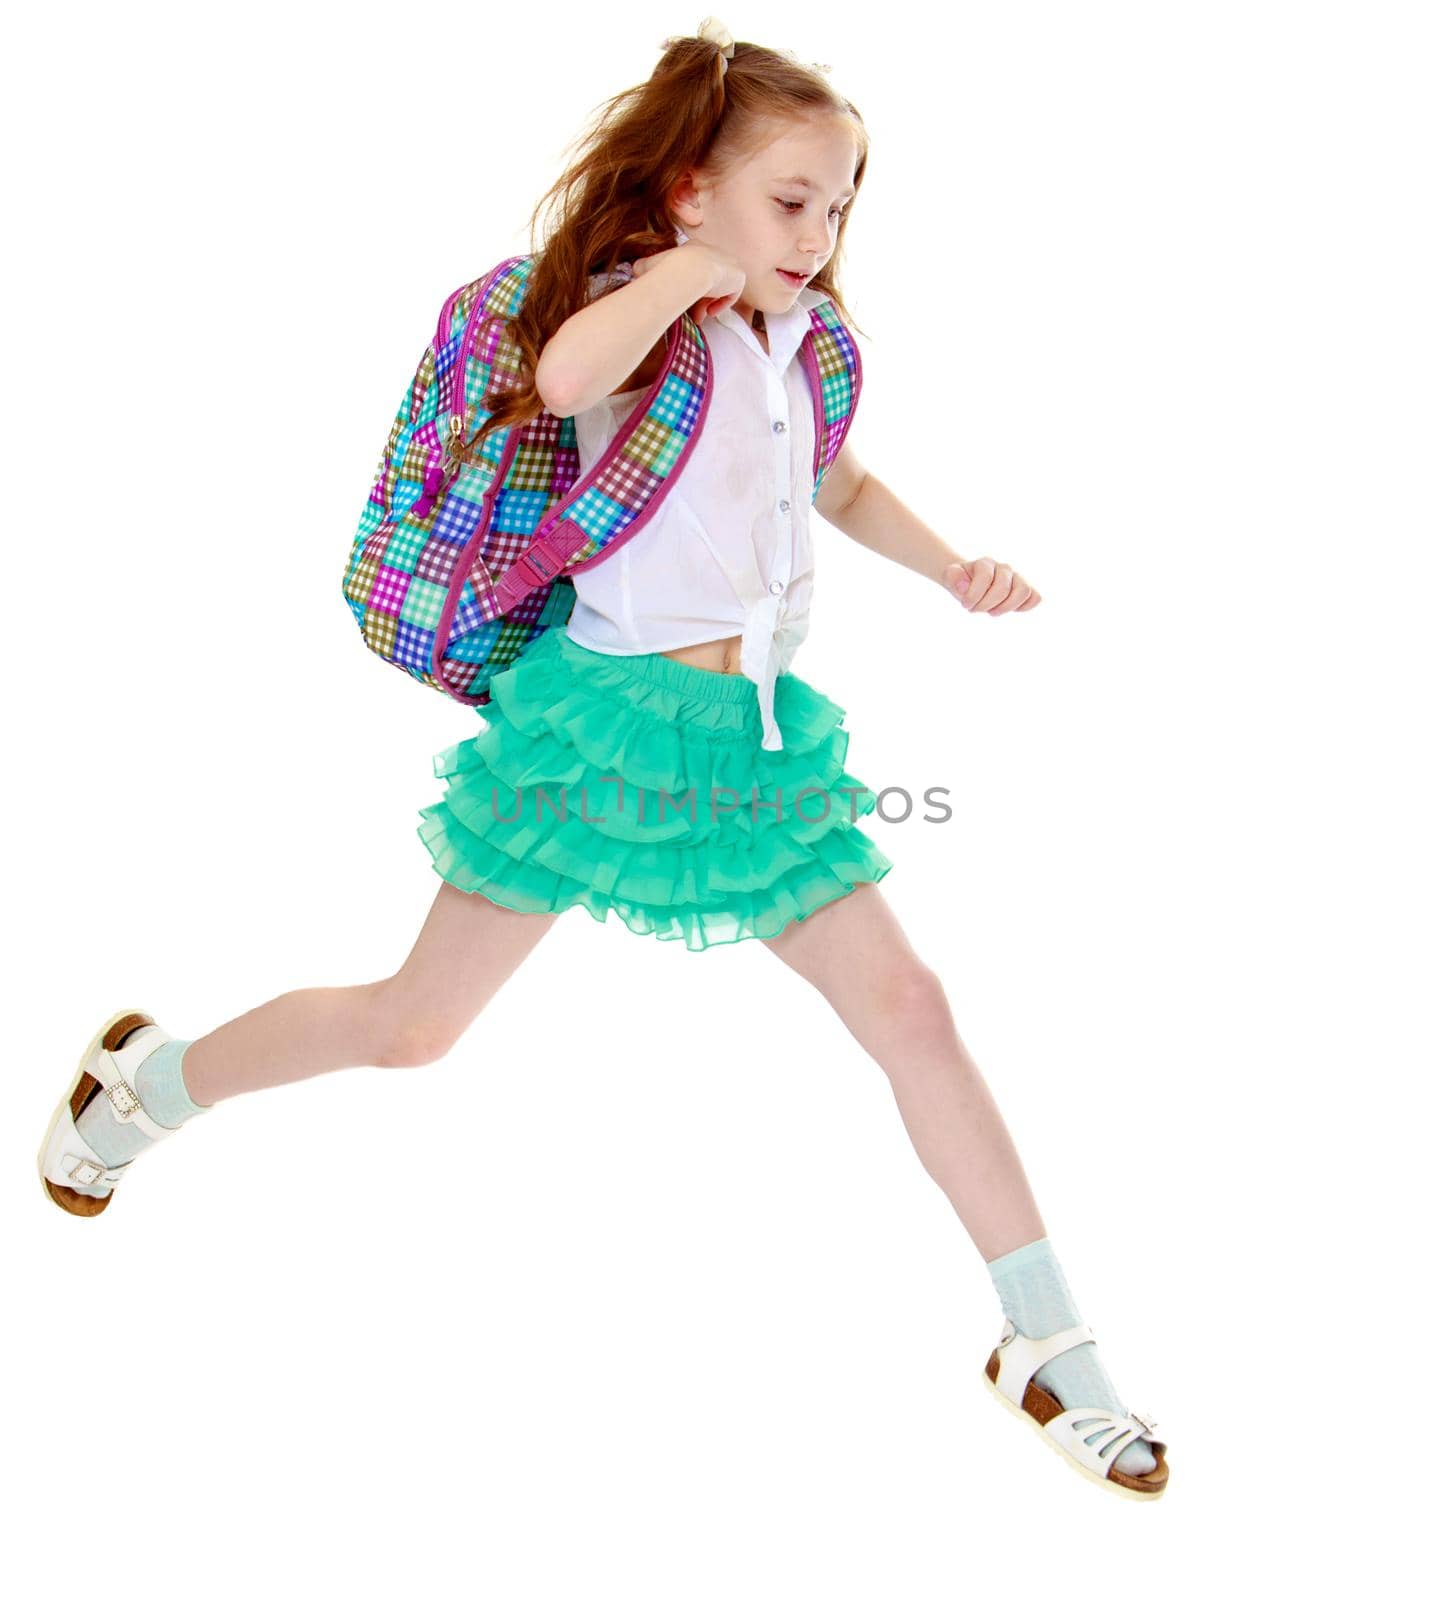 Joyful little girl with long hair to the waist which wire braided white ribbons. In a white shirt without a pattern and green short skirt. Girl jumping over obstacles big step - Isolated